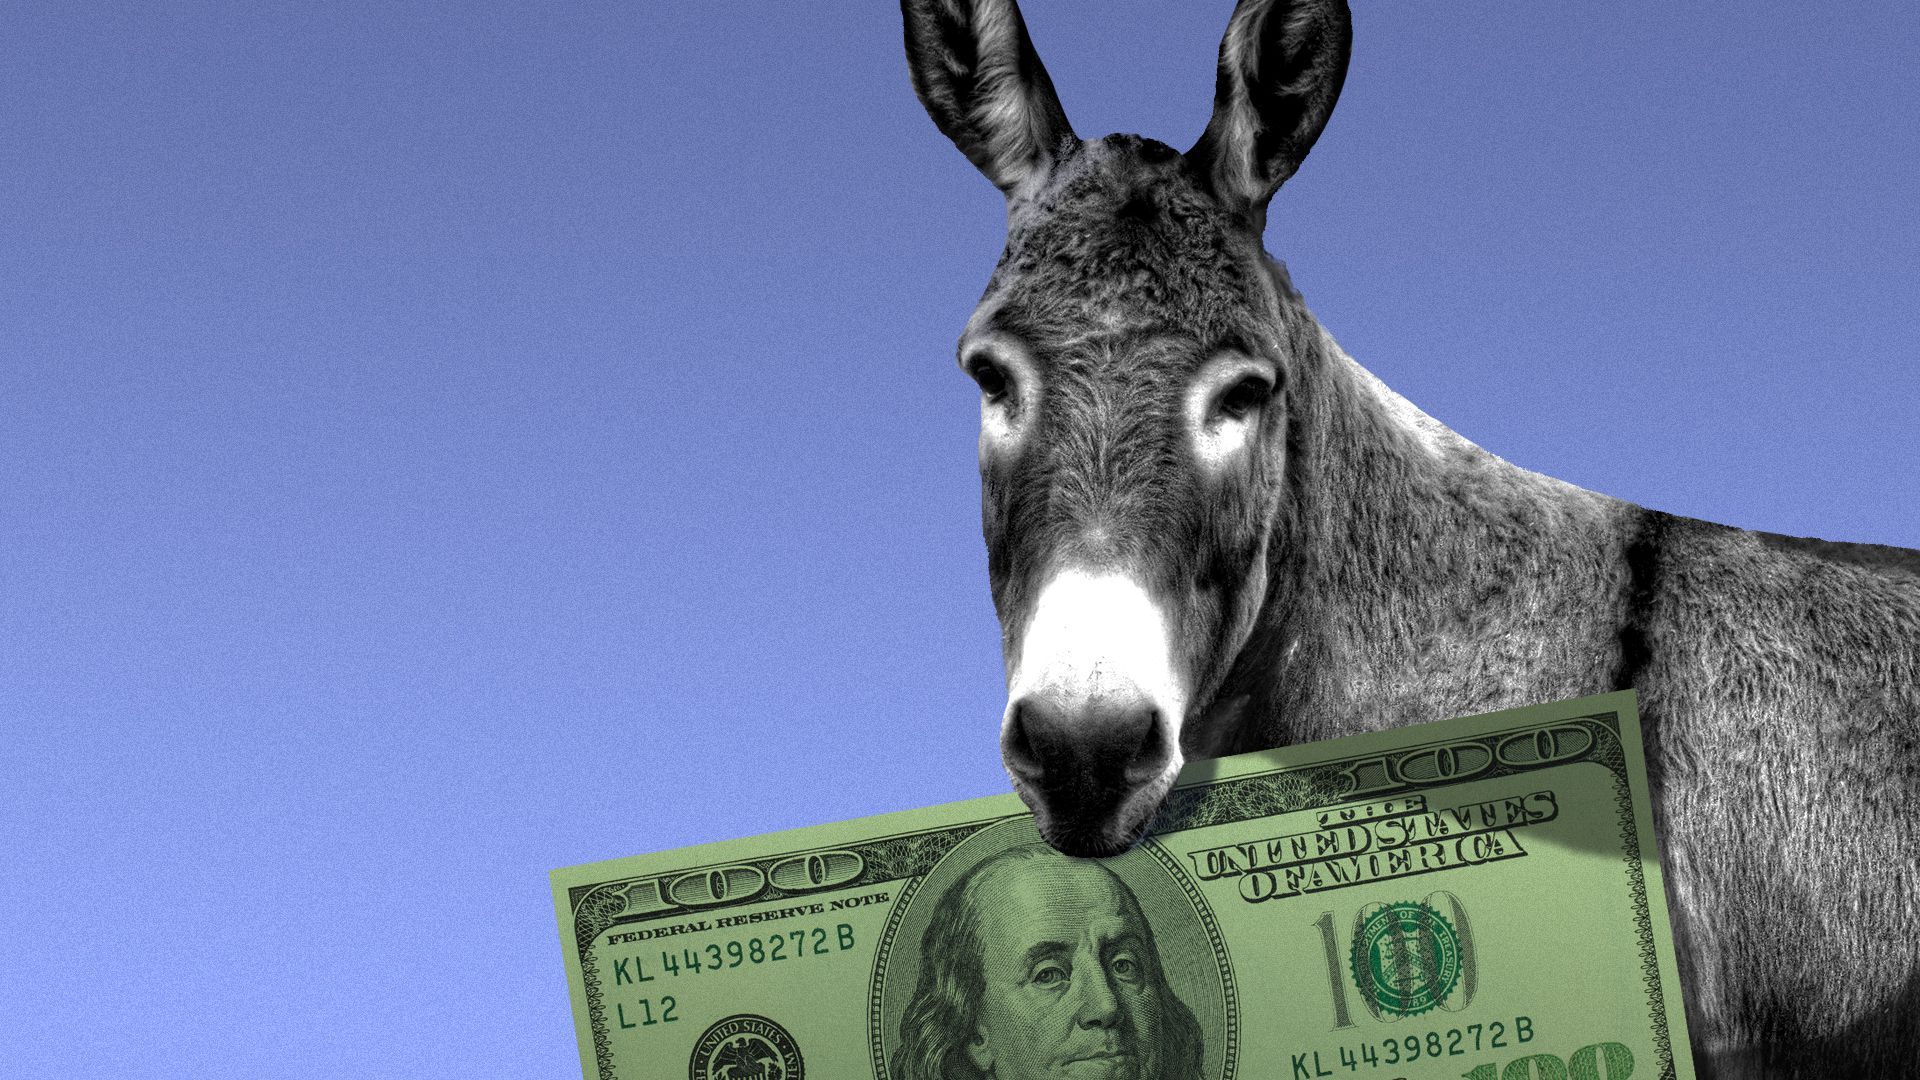 An illustration shows a donkey holding a $100 bill in its jaws.